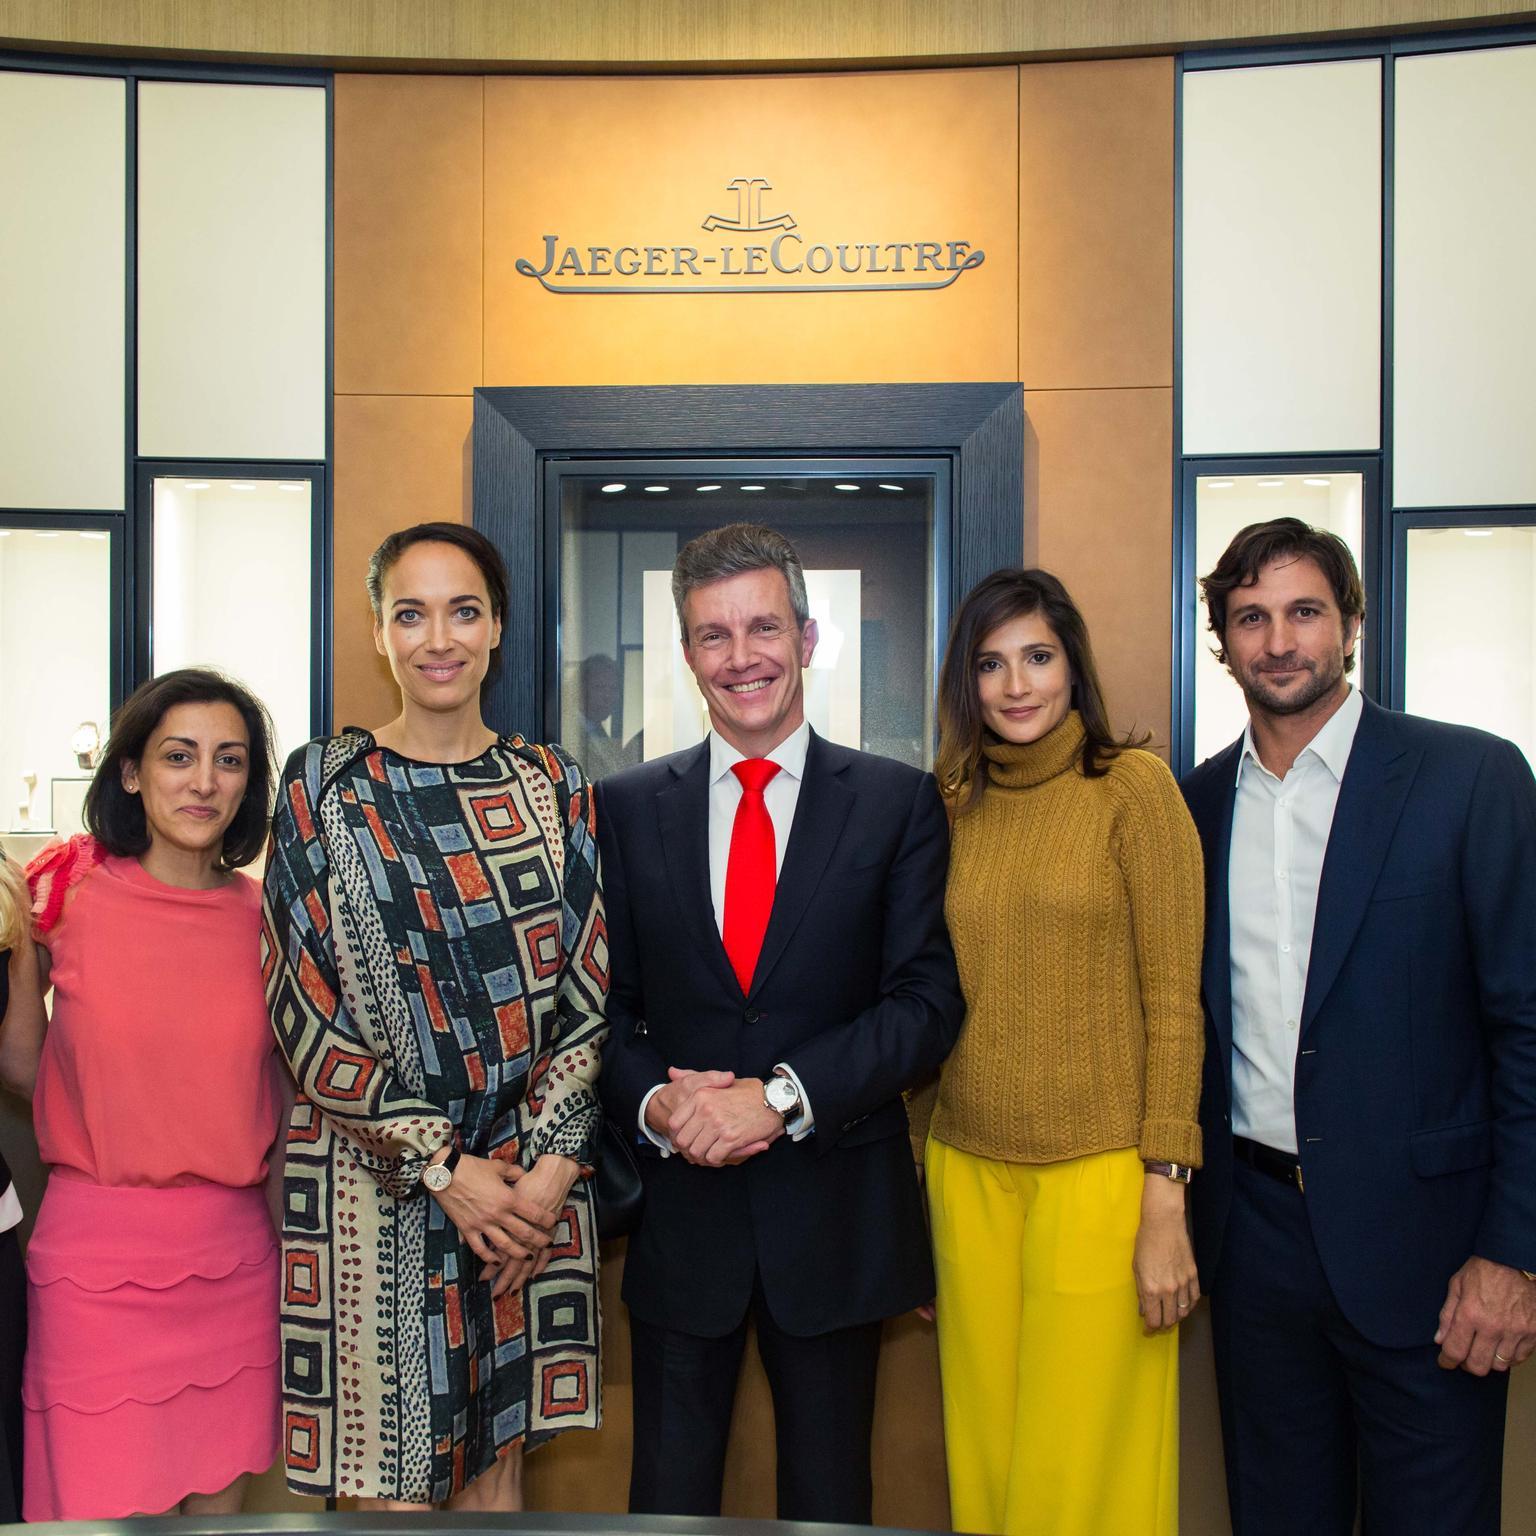 Jaeger-LeCoultre's UK brand director Zahra Kassim-Lakha, actress Carmen Chaplin, CEO Daniel Riedo, Astrid Munoz Astrada and Argentine polo player Eduardo Novillo Astrada at the opening of the watchmaker's new boutique in London.